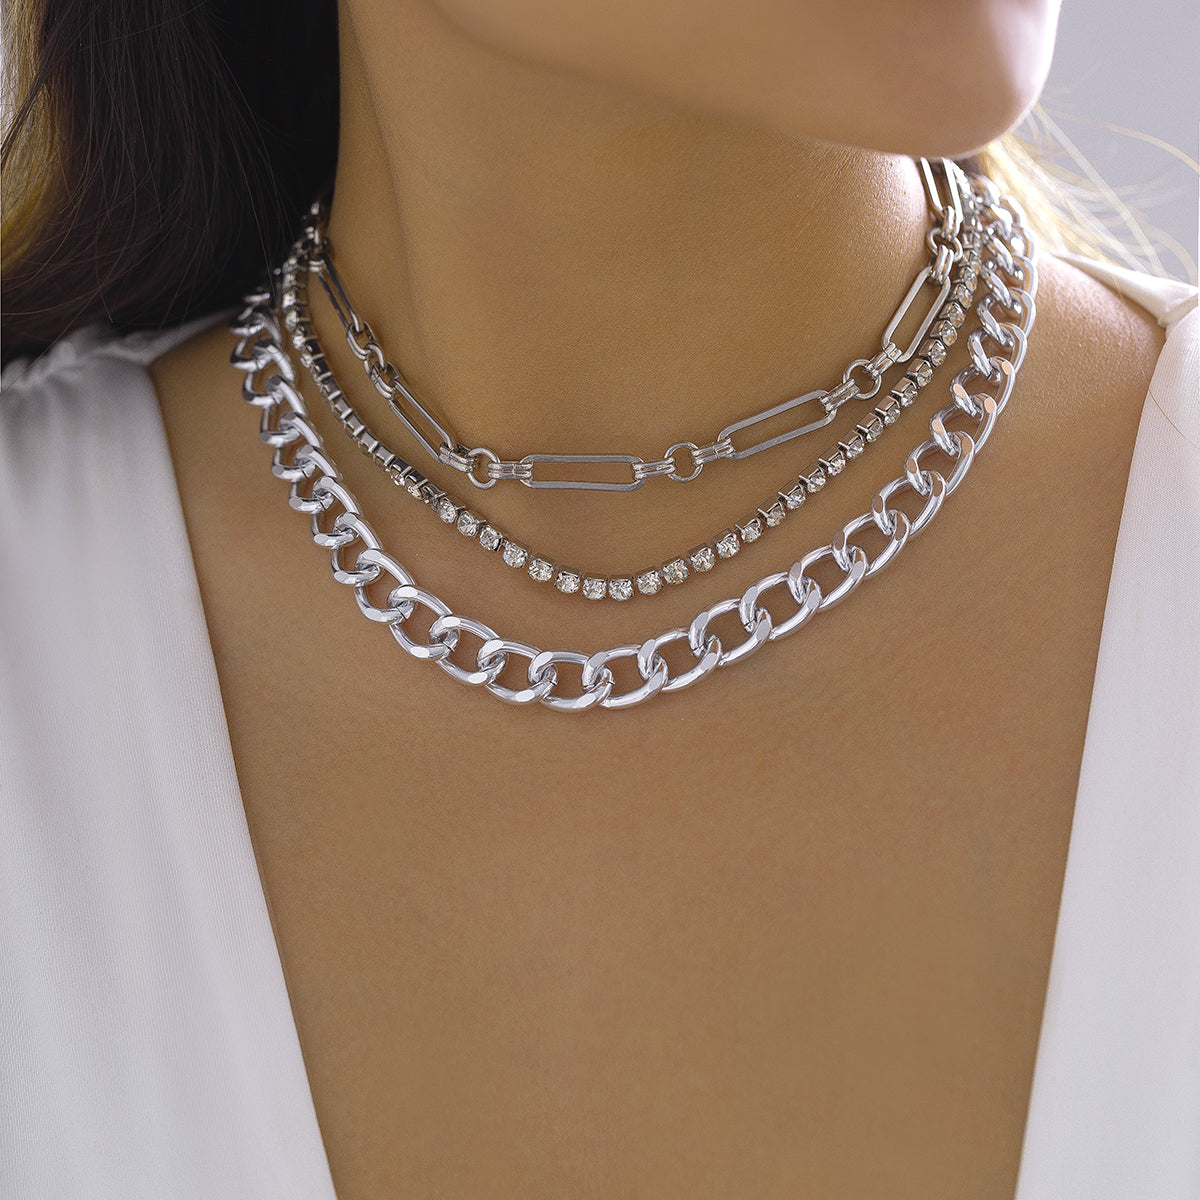 Cubic Zirconia & Silver-Plated Curb Chain Necklace Set